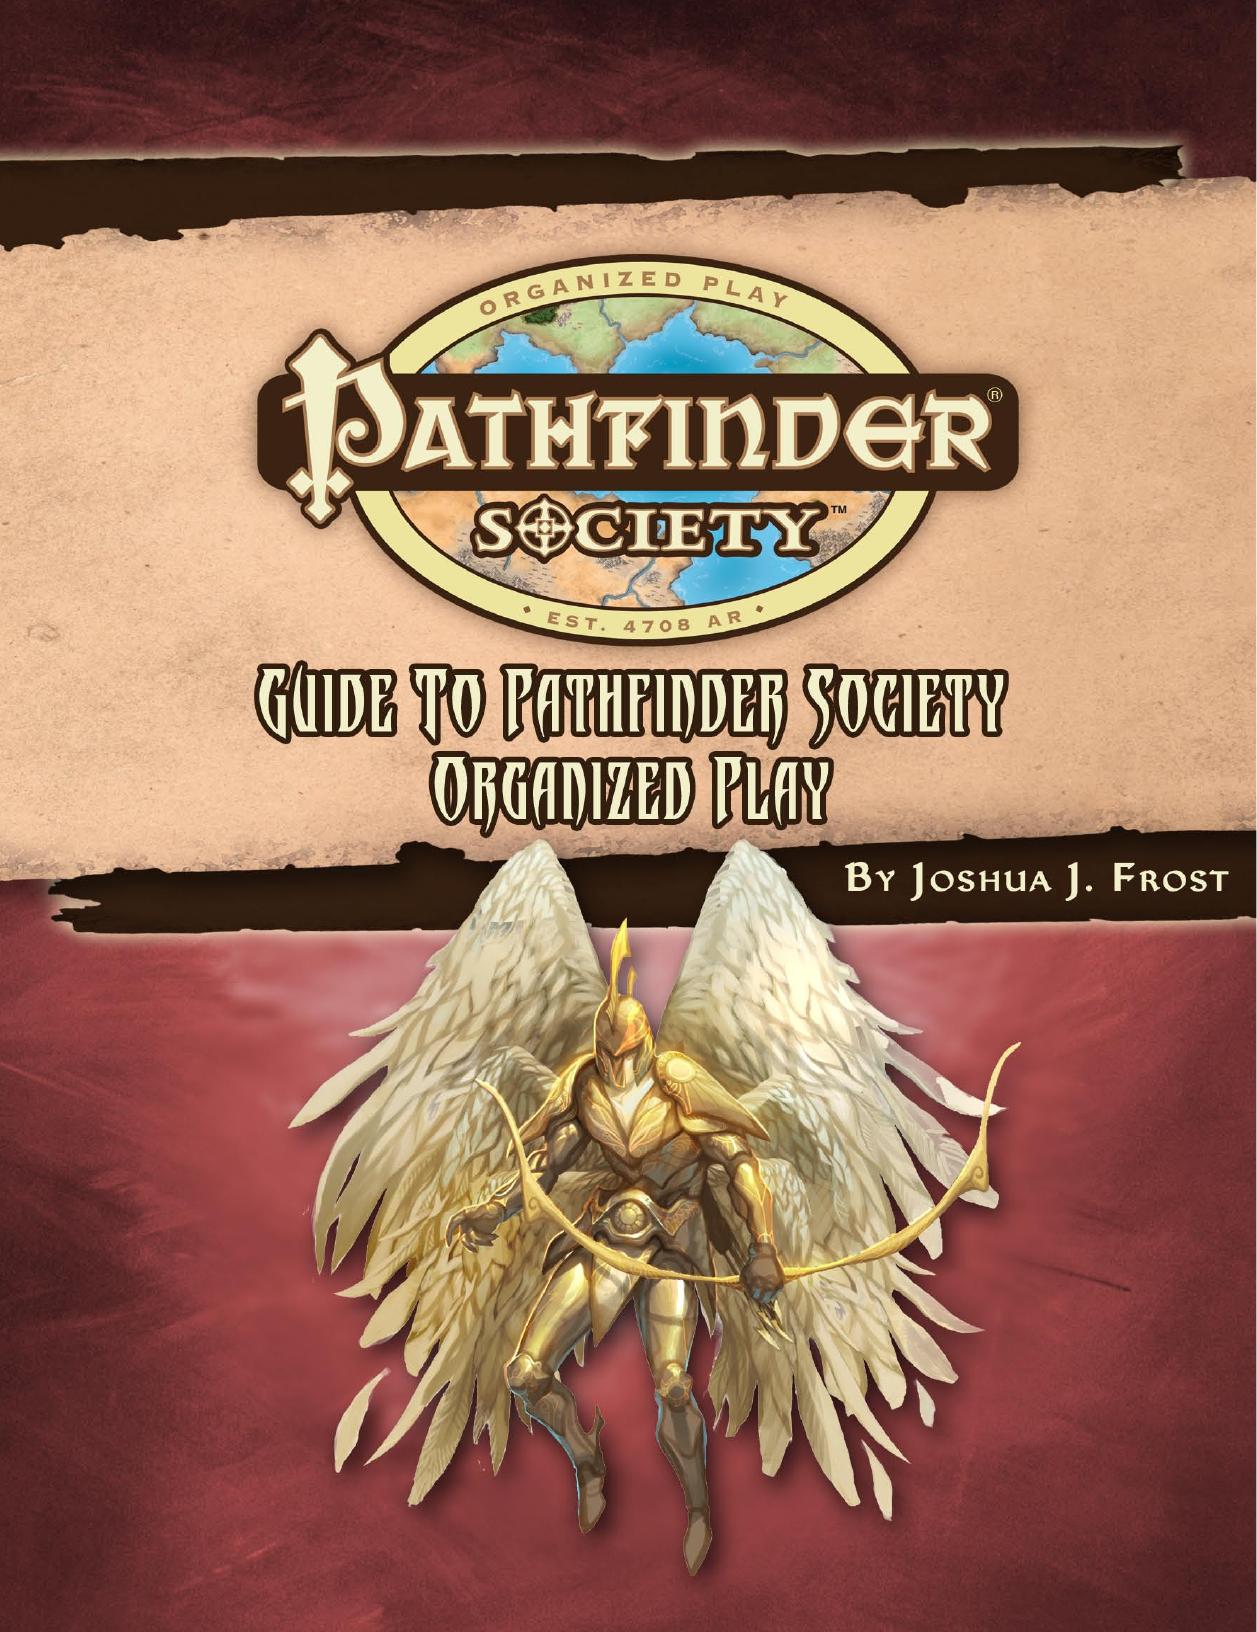 Guide to Pathfinder Society Organized Play (2.01)